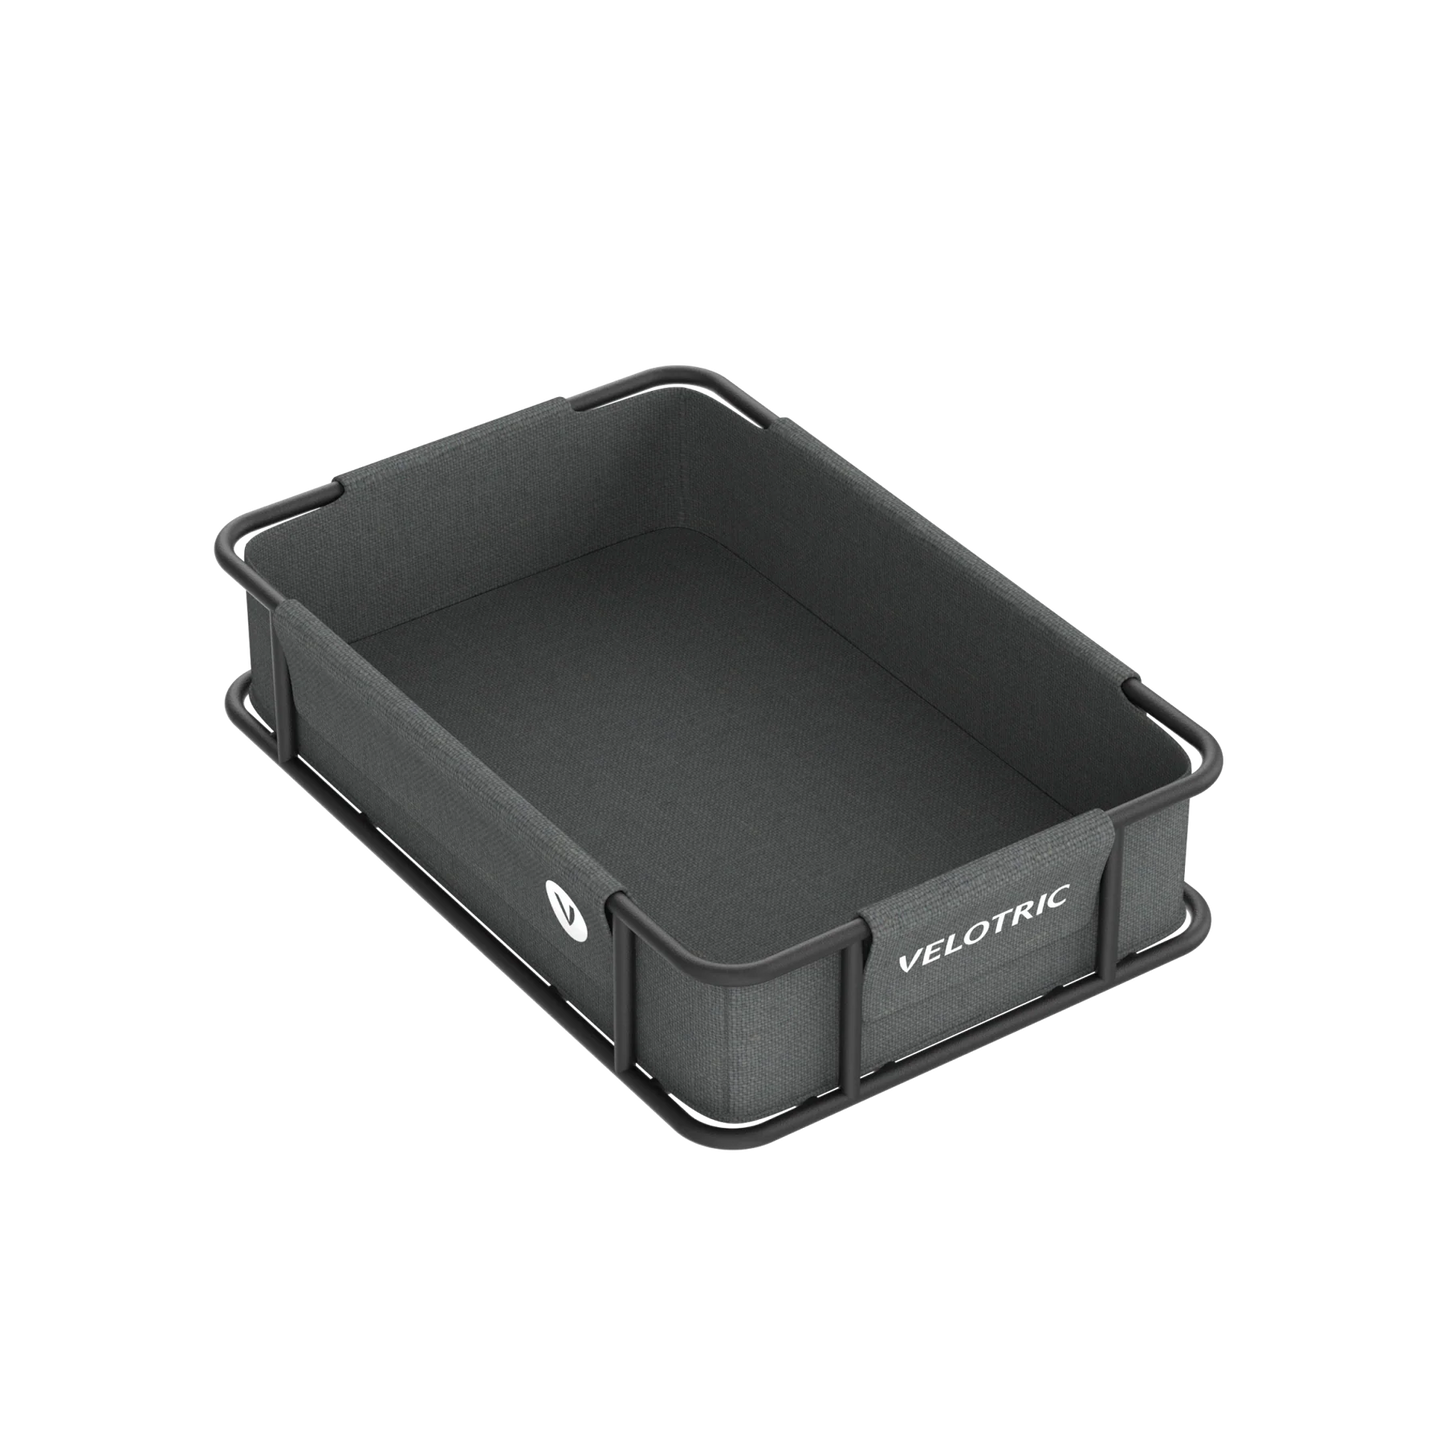 A large volume Velotric rear basket with a waterproof fabric, displayed on a black tray on a black background.